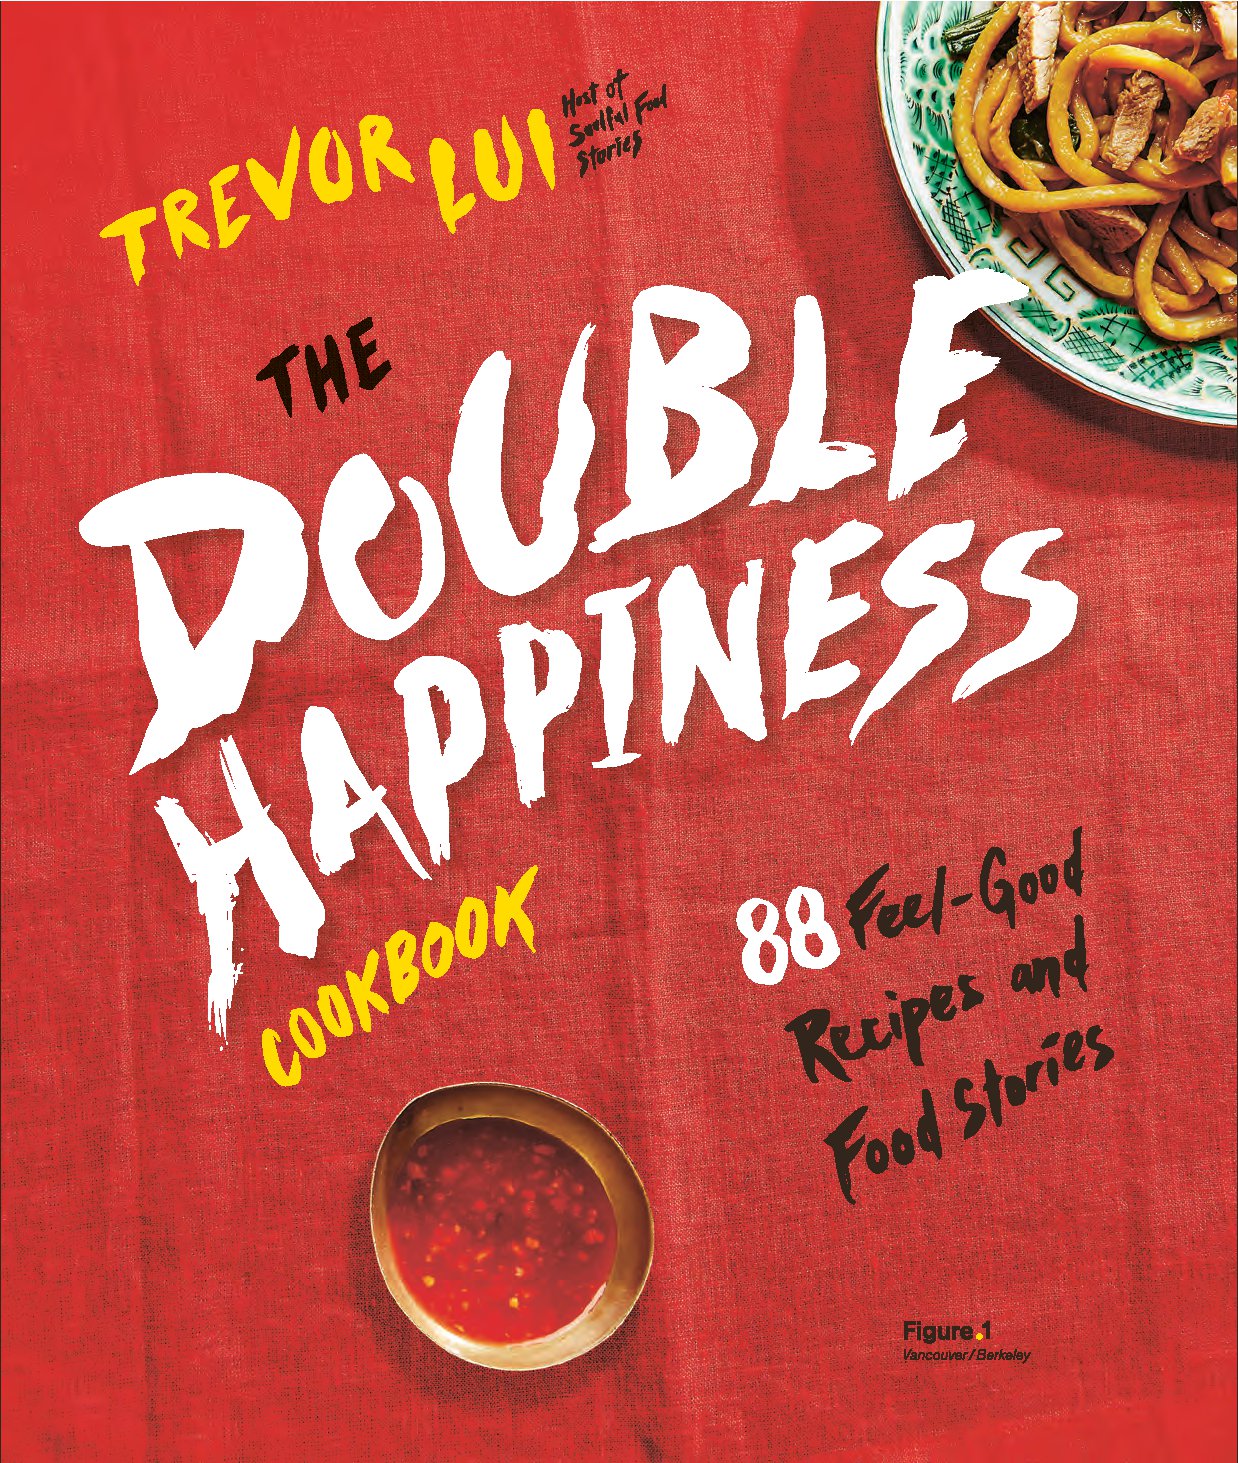 The Double Happiness Cookbook